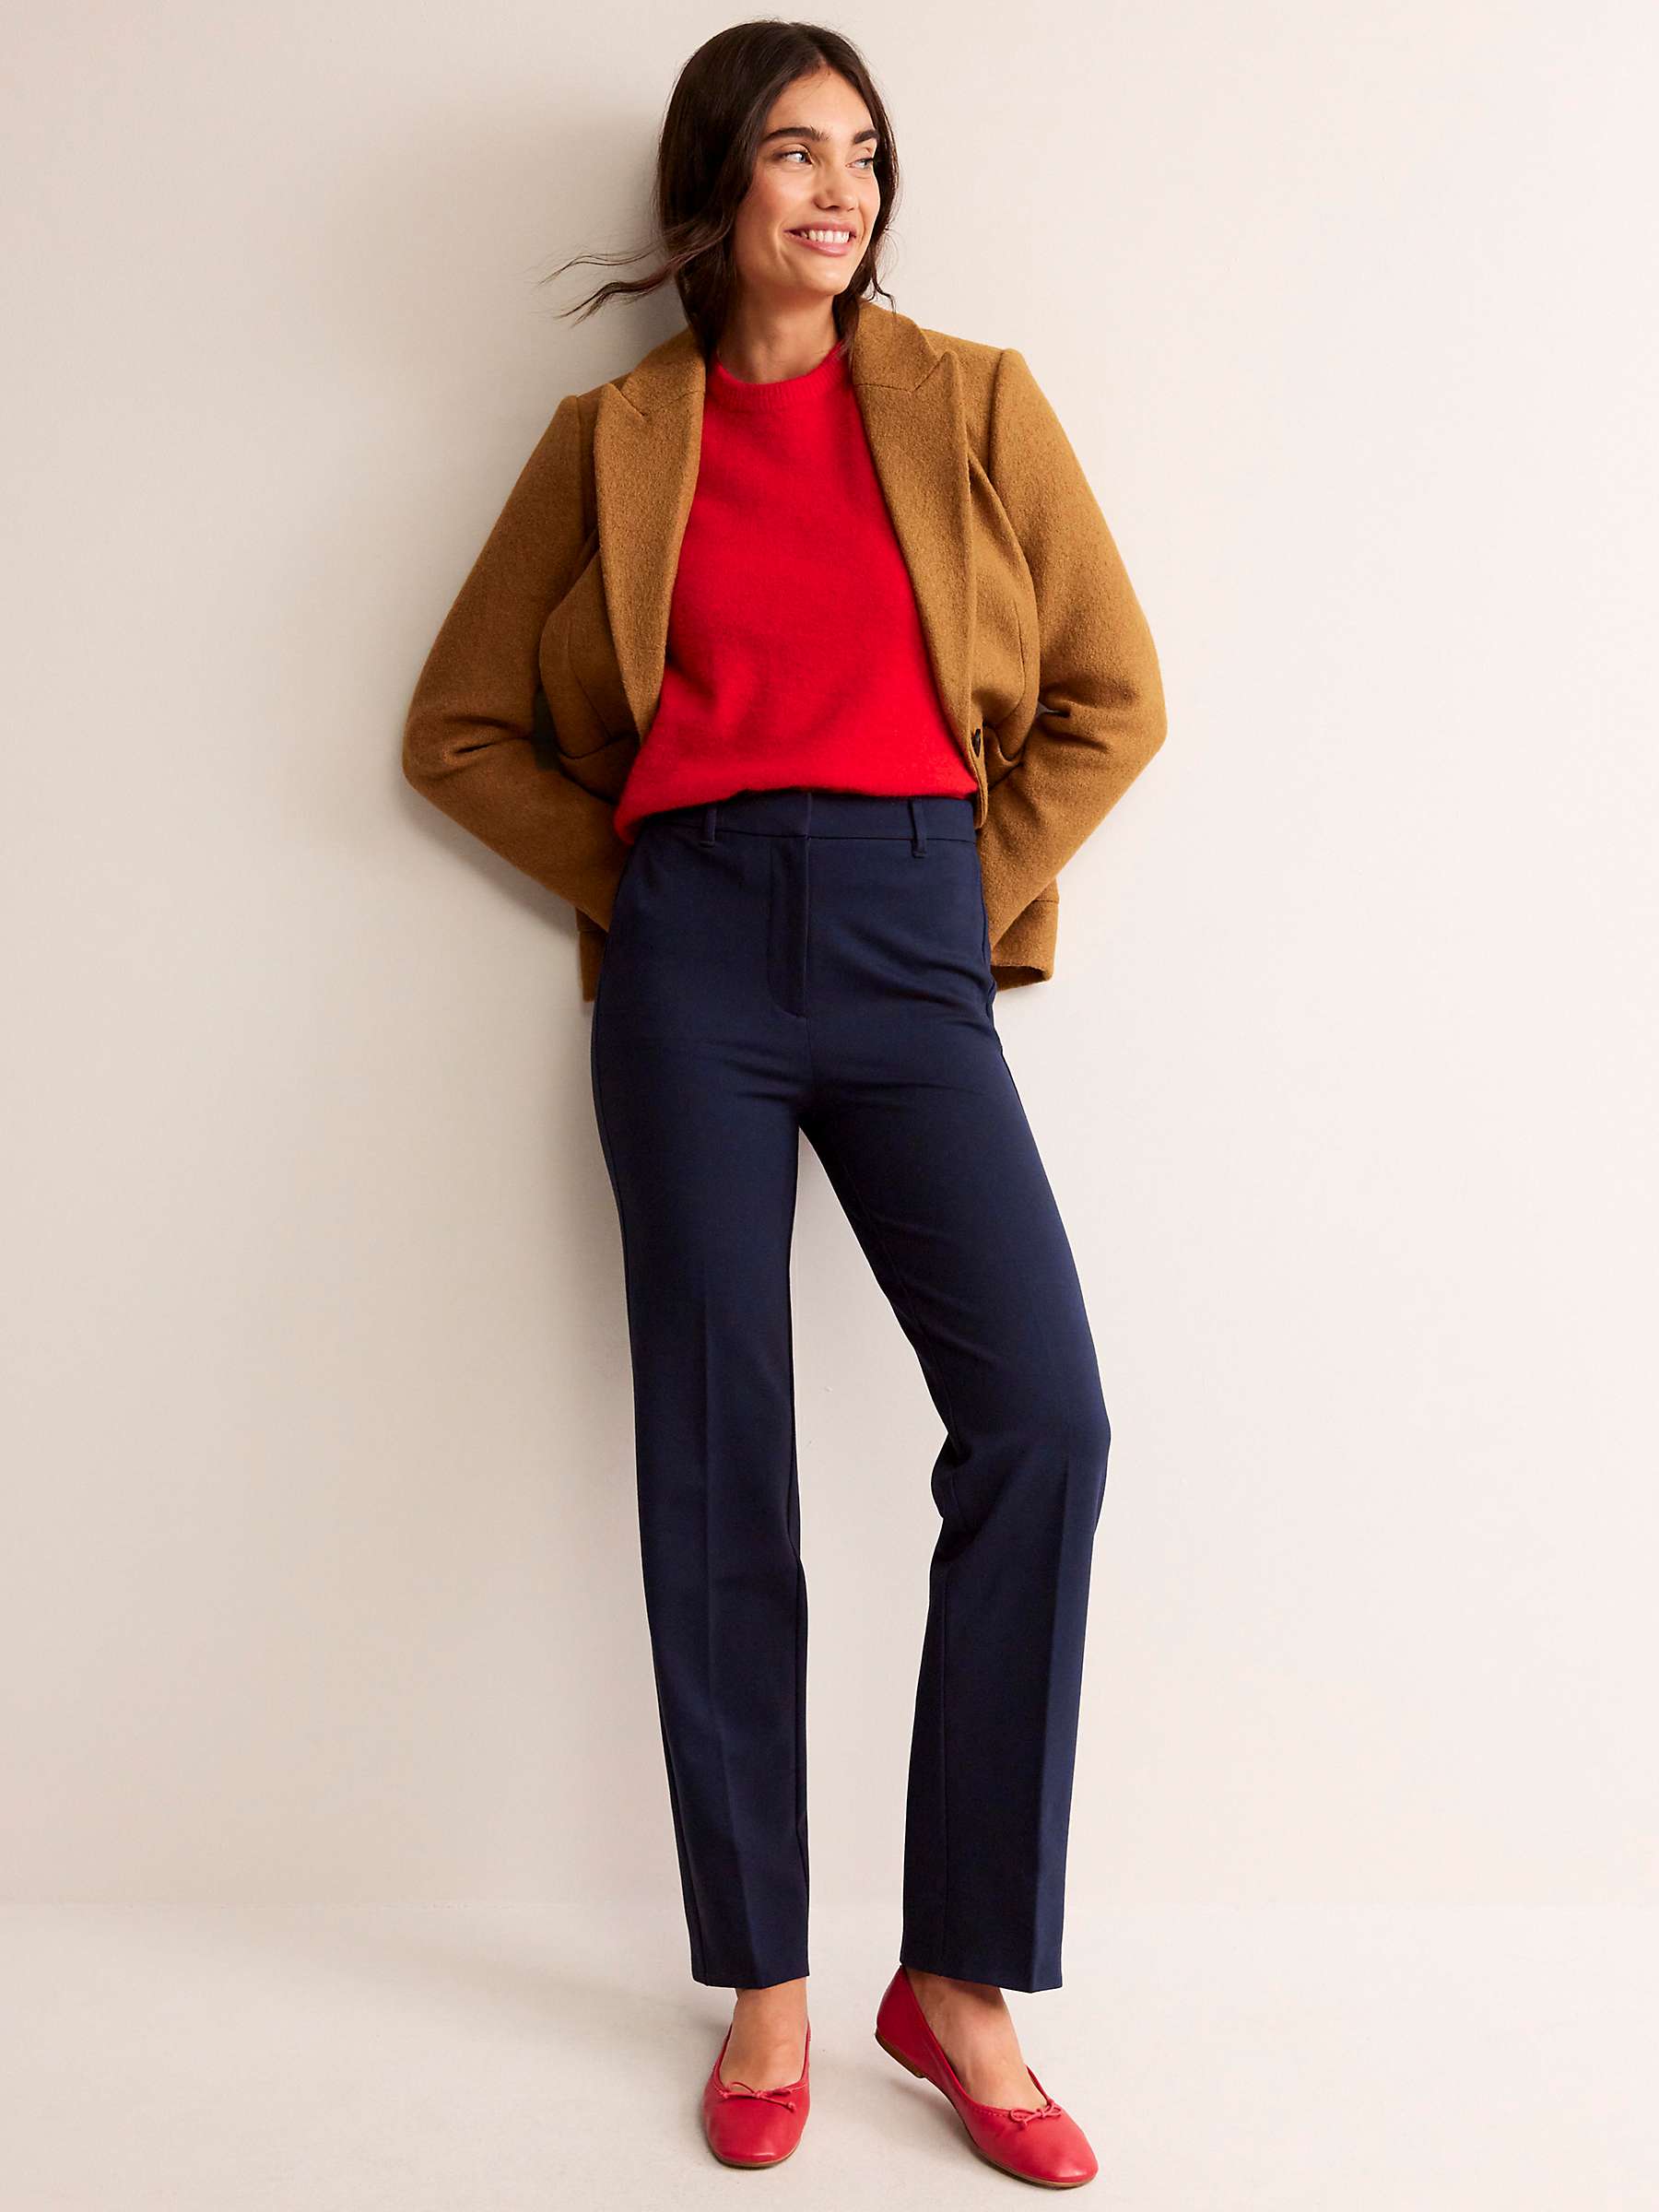 Buy Boden Pimilico Ponte Trousers Online at johnlewis.com